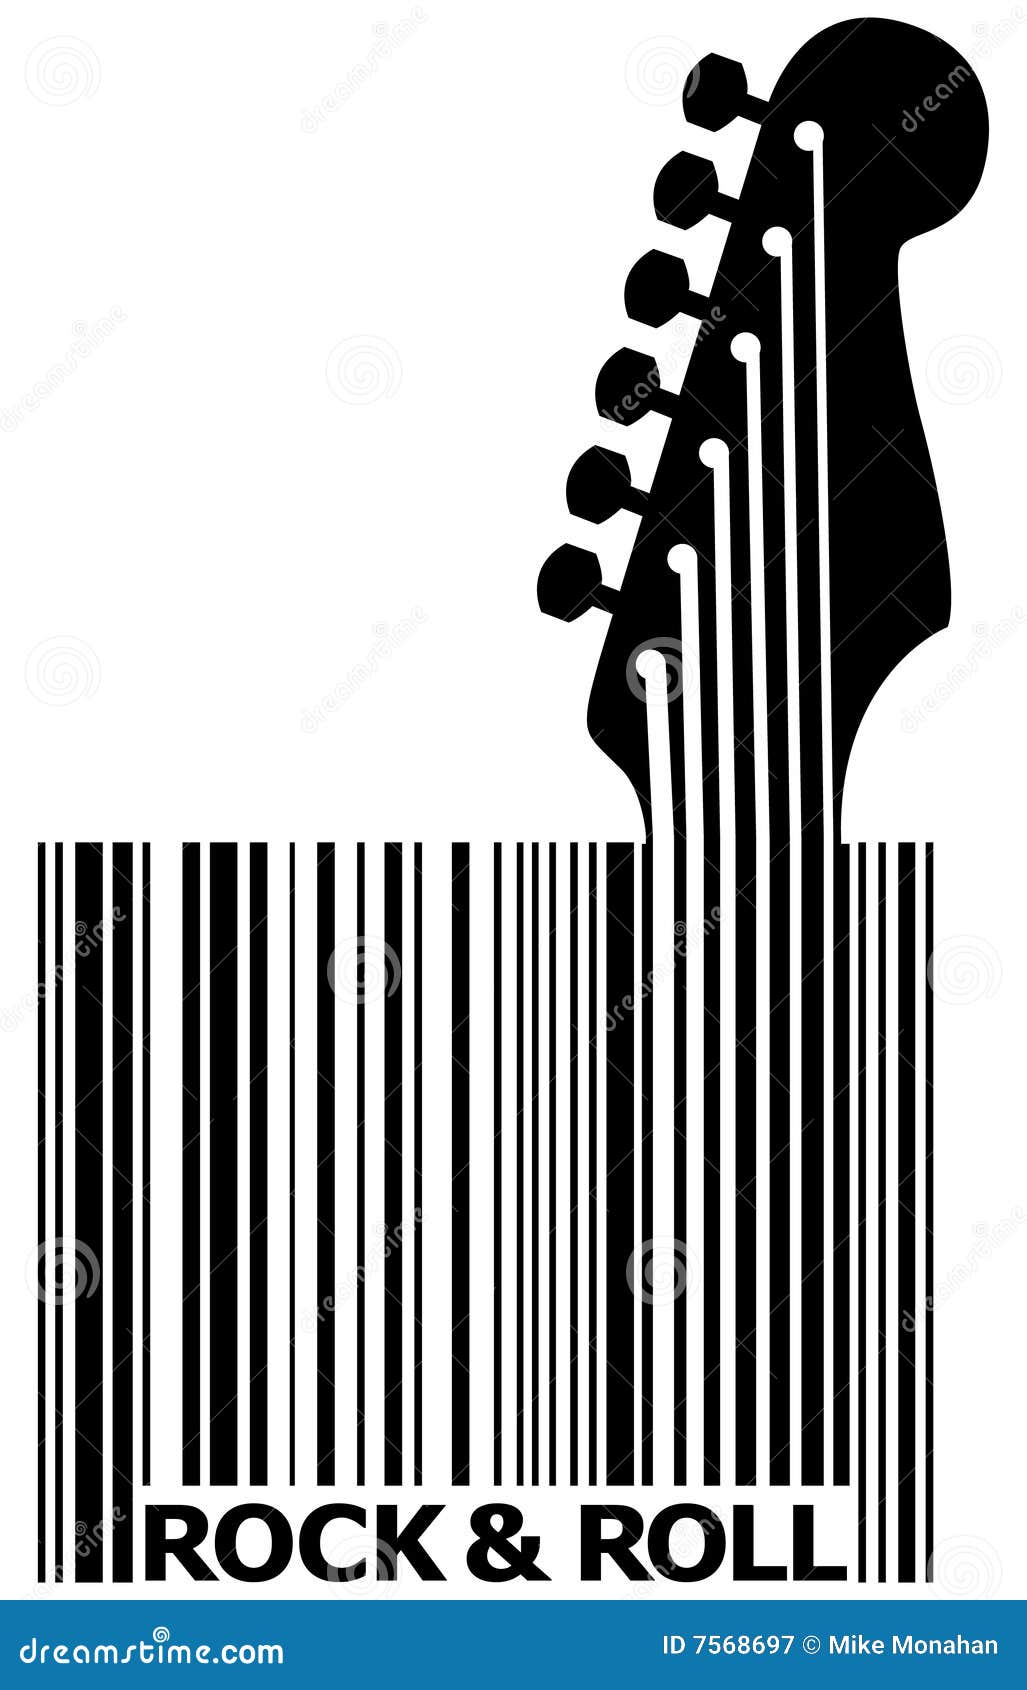 UPC Barcode With Guitar Royalty Free Stock Photography ...